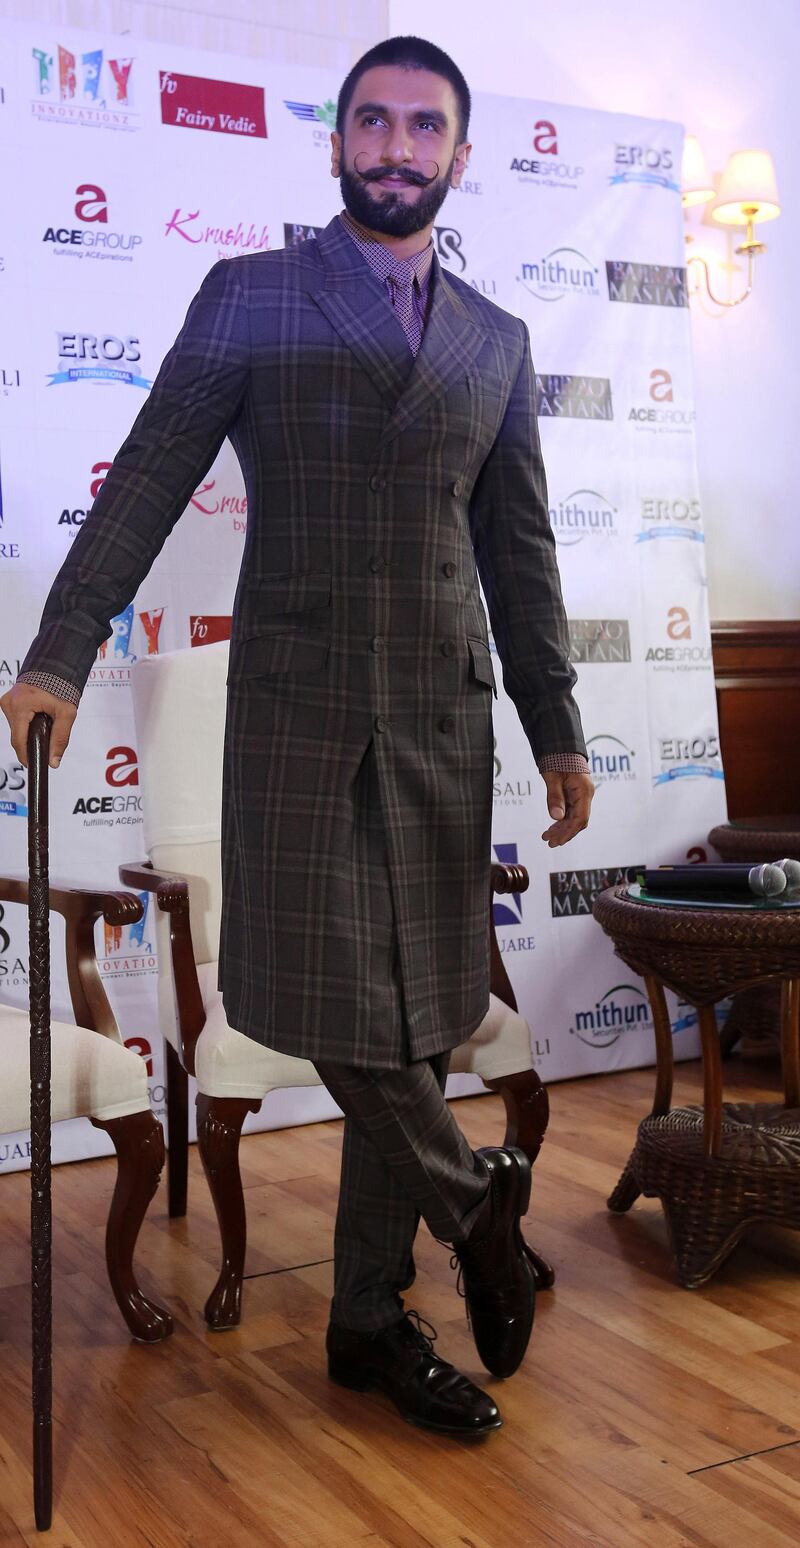 epa05065855 Indian Bollywood actor Ranveer Singh poses for pictures before a press conference for his role in the new Bollywood movie 'Bajirao Mastani' in New Delhi, India, 12 December 2015. Ranveer Singh and Deepika Padukone arrived in Delhi to promote their movie which is expected to release on 18 December.  EPA/RAJAT GUPTA